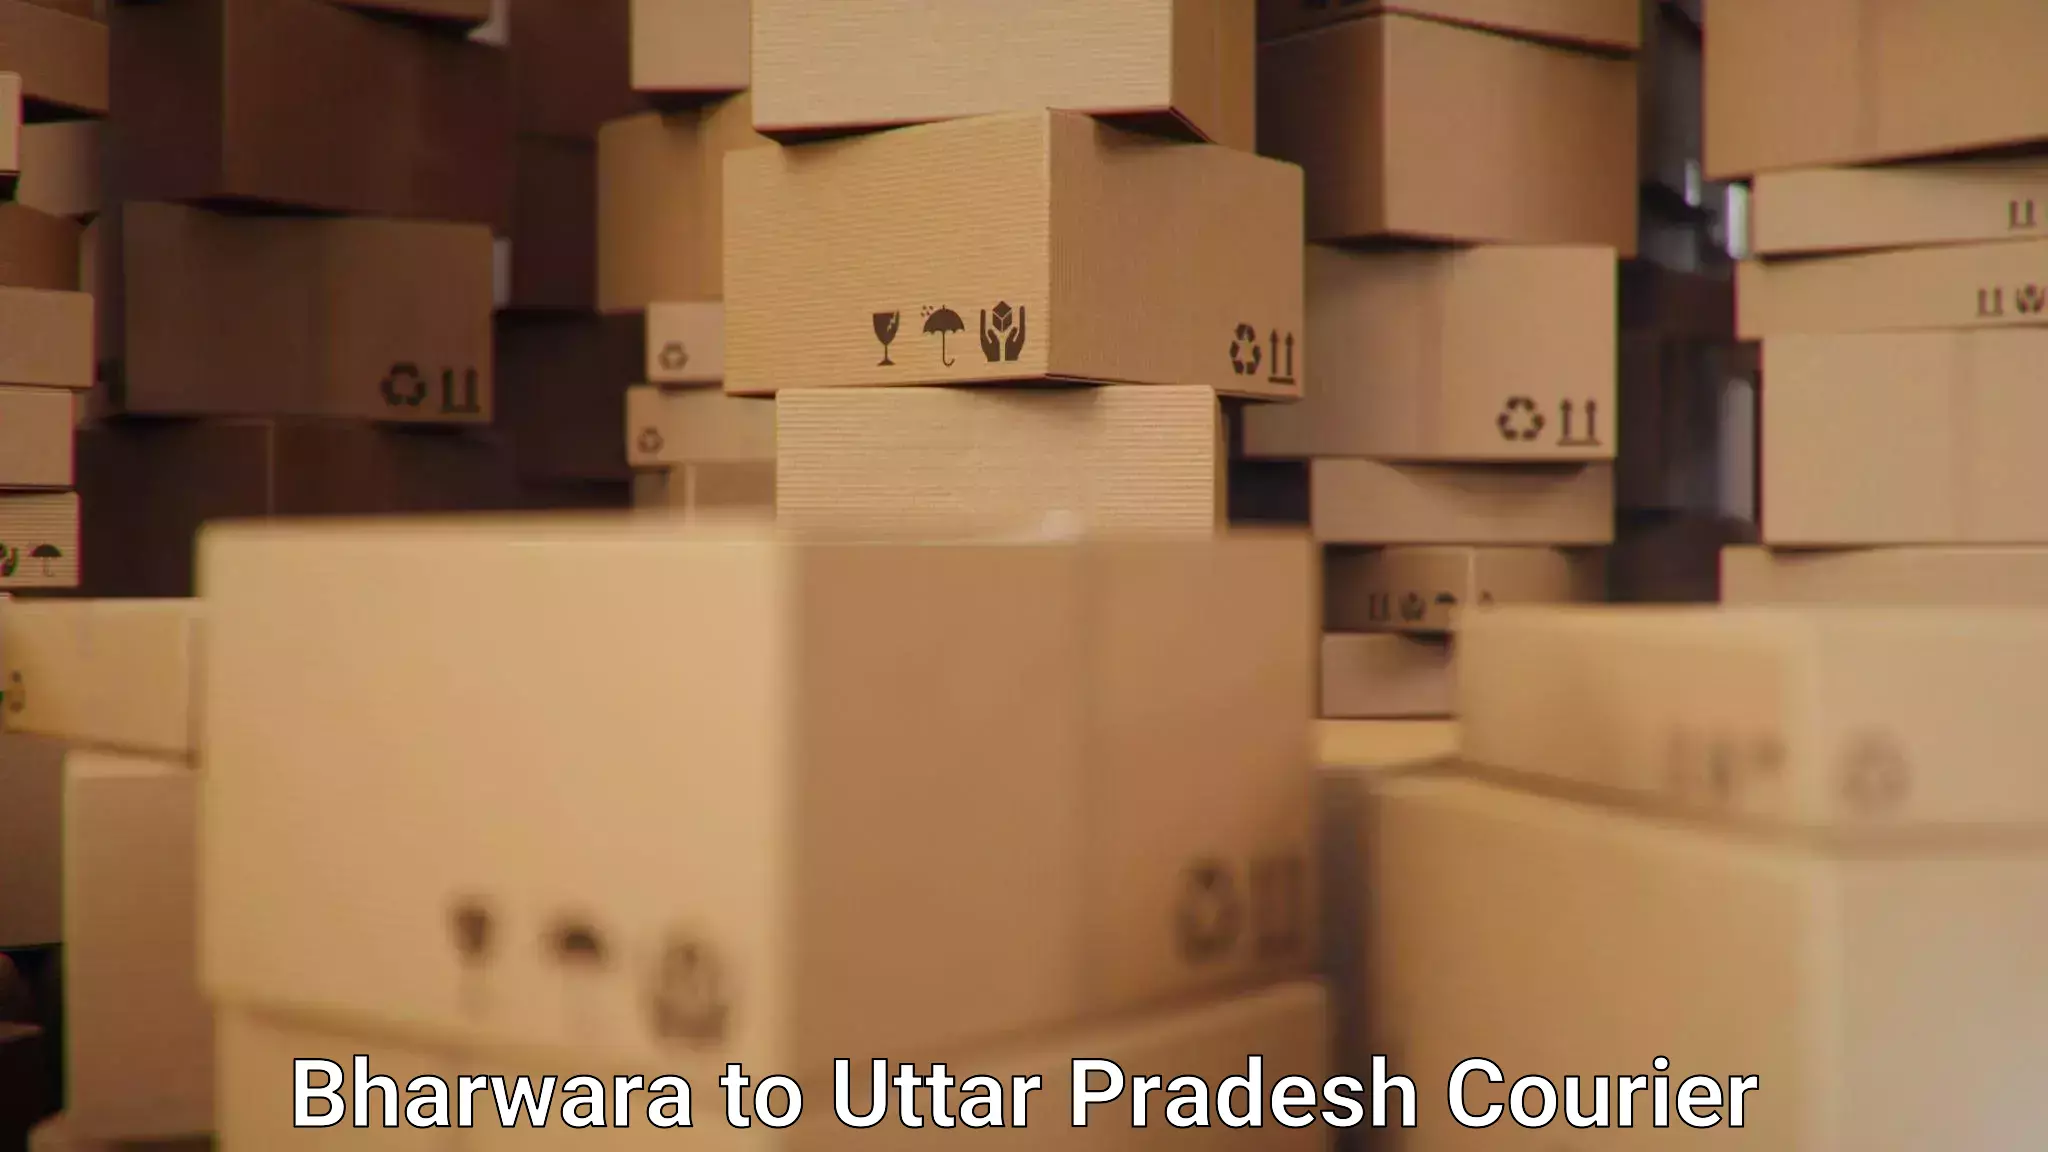 Overnight delivery services Bharwara to Sahatwar